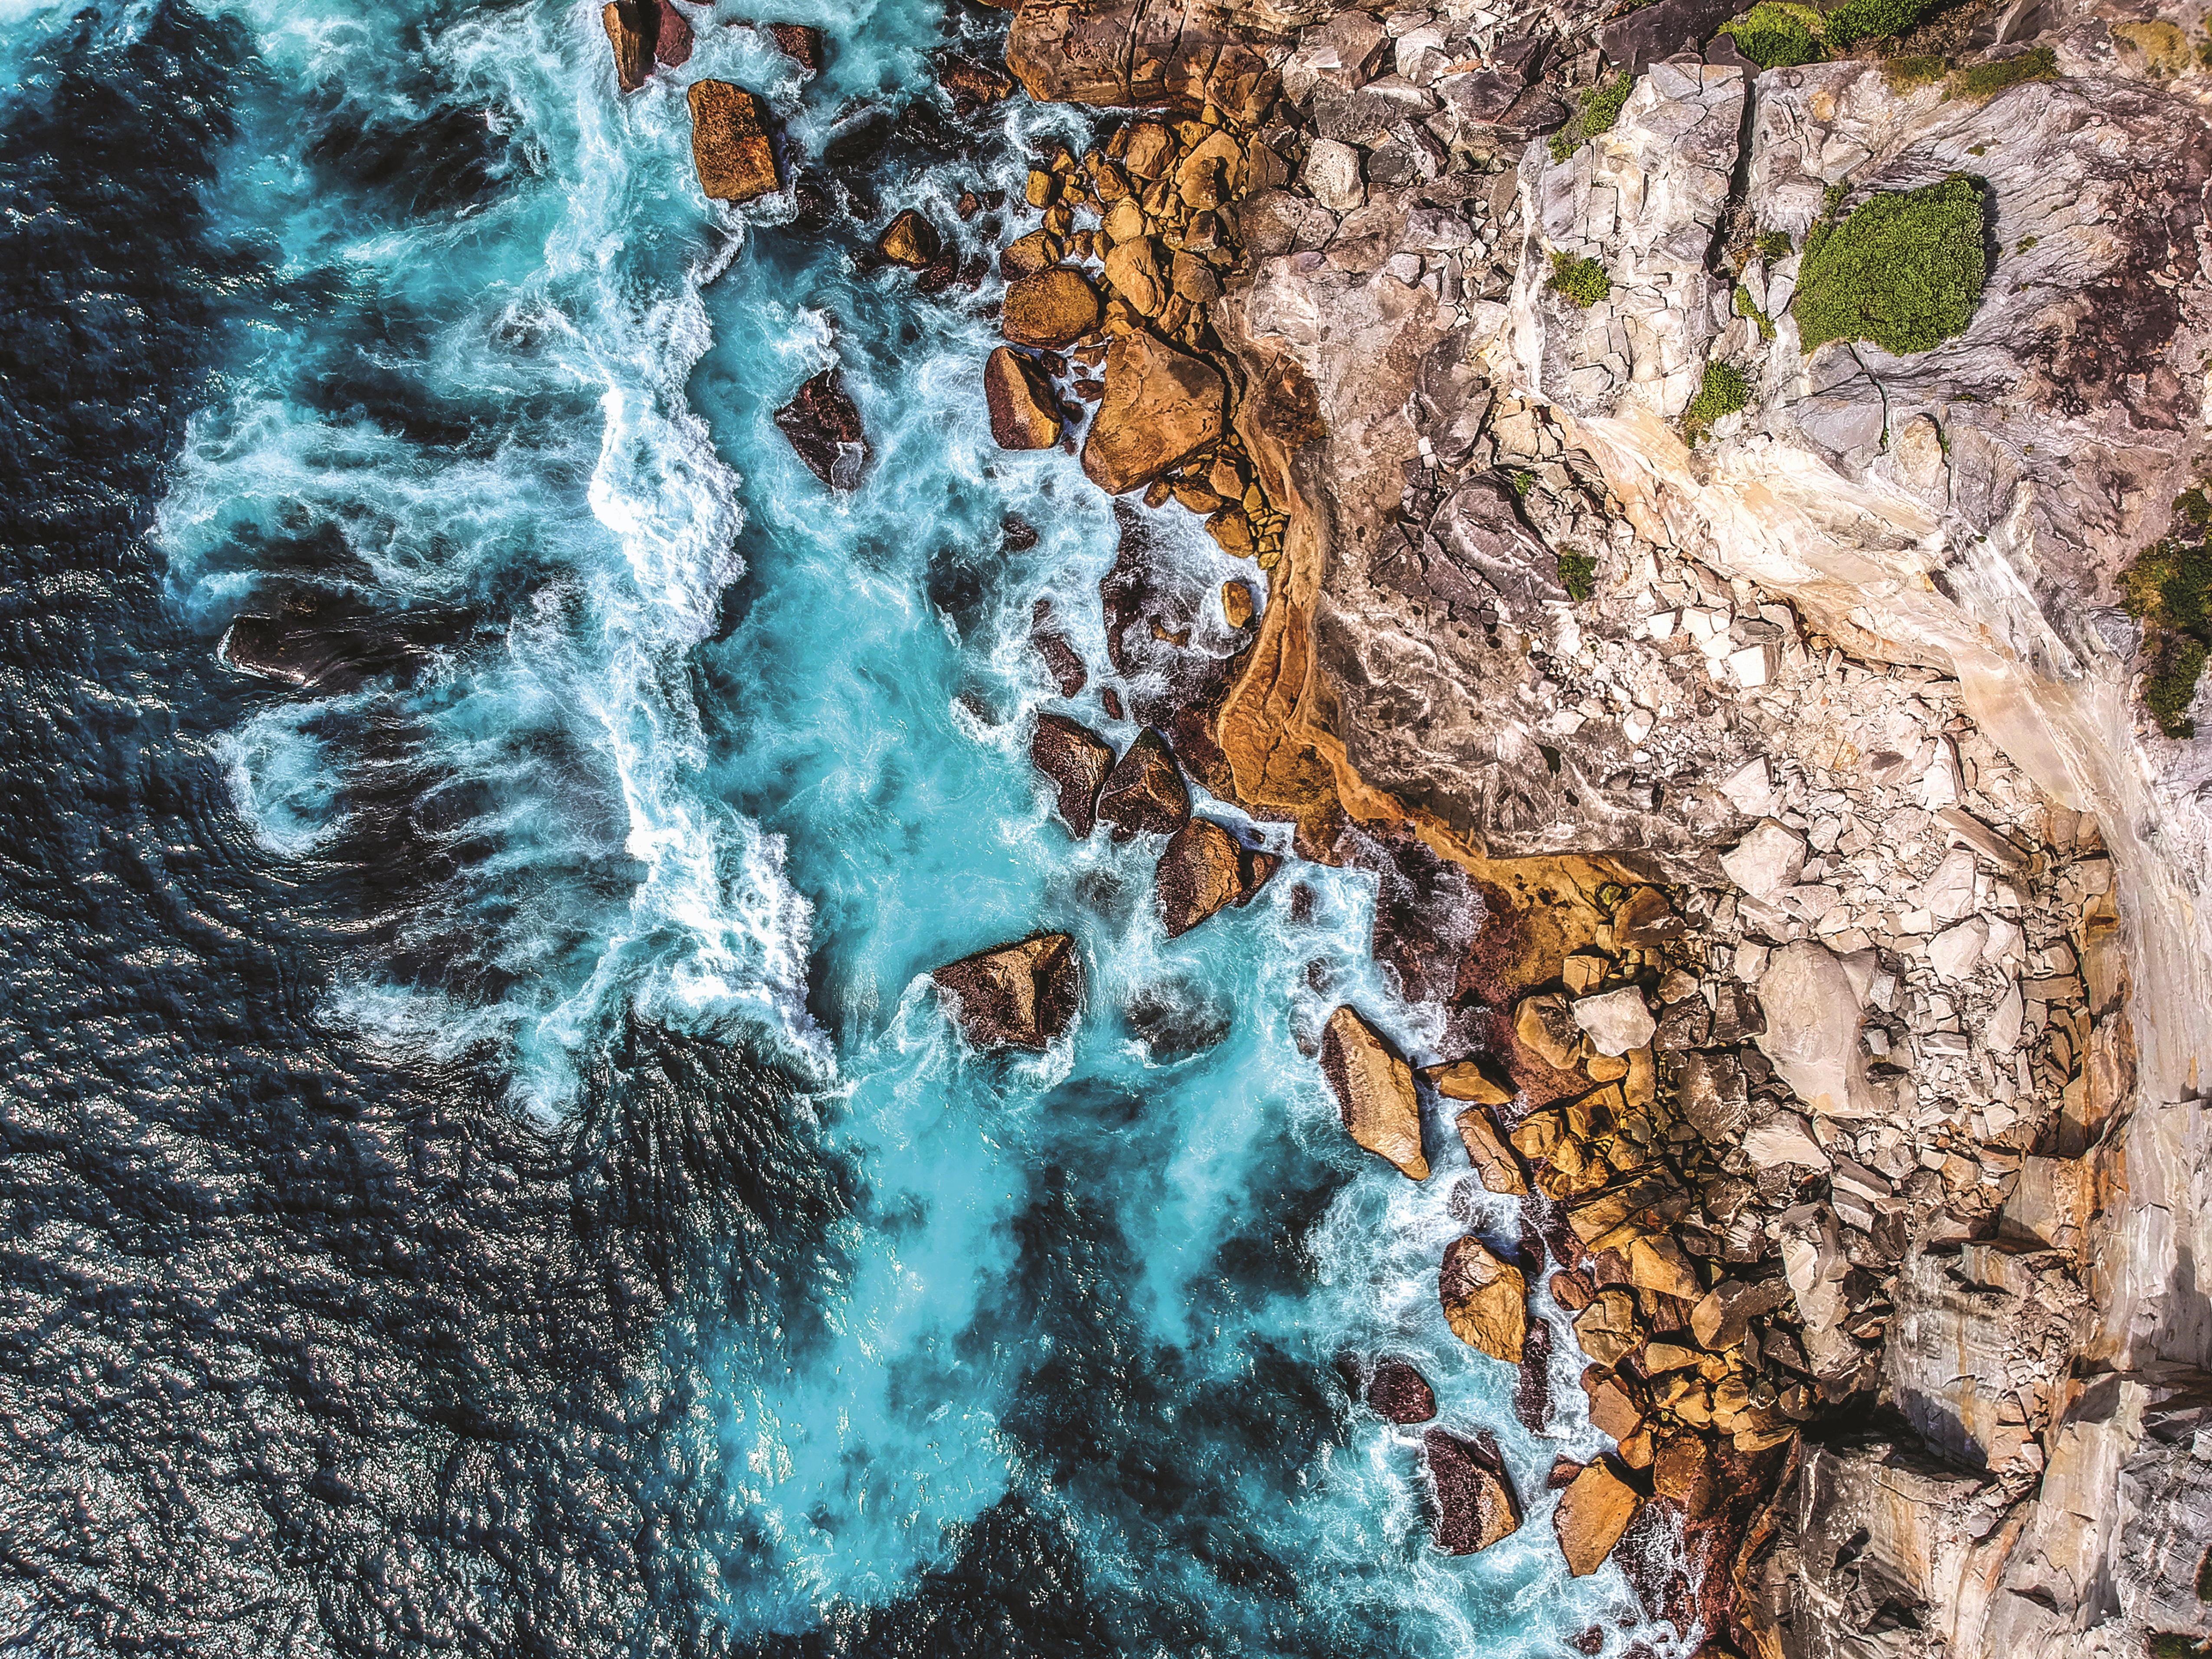 RotorDrone - Drone News | 12 tips to create incredible drone photos